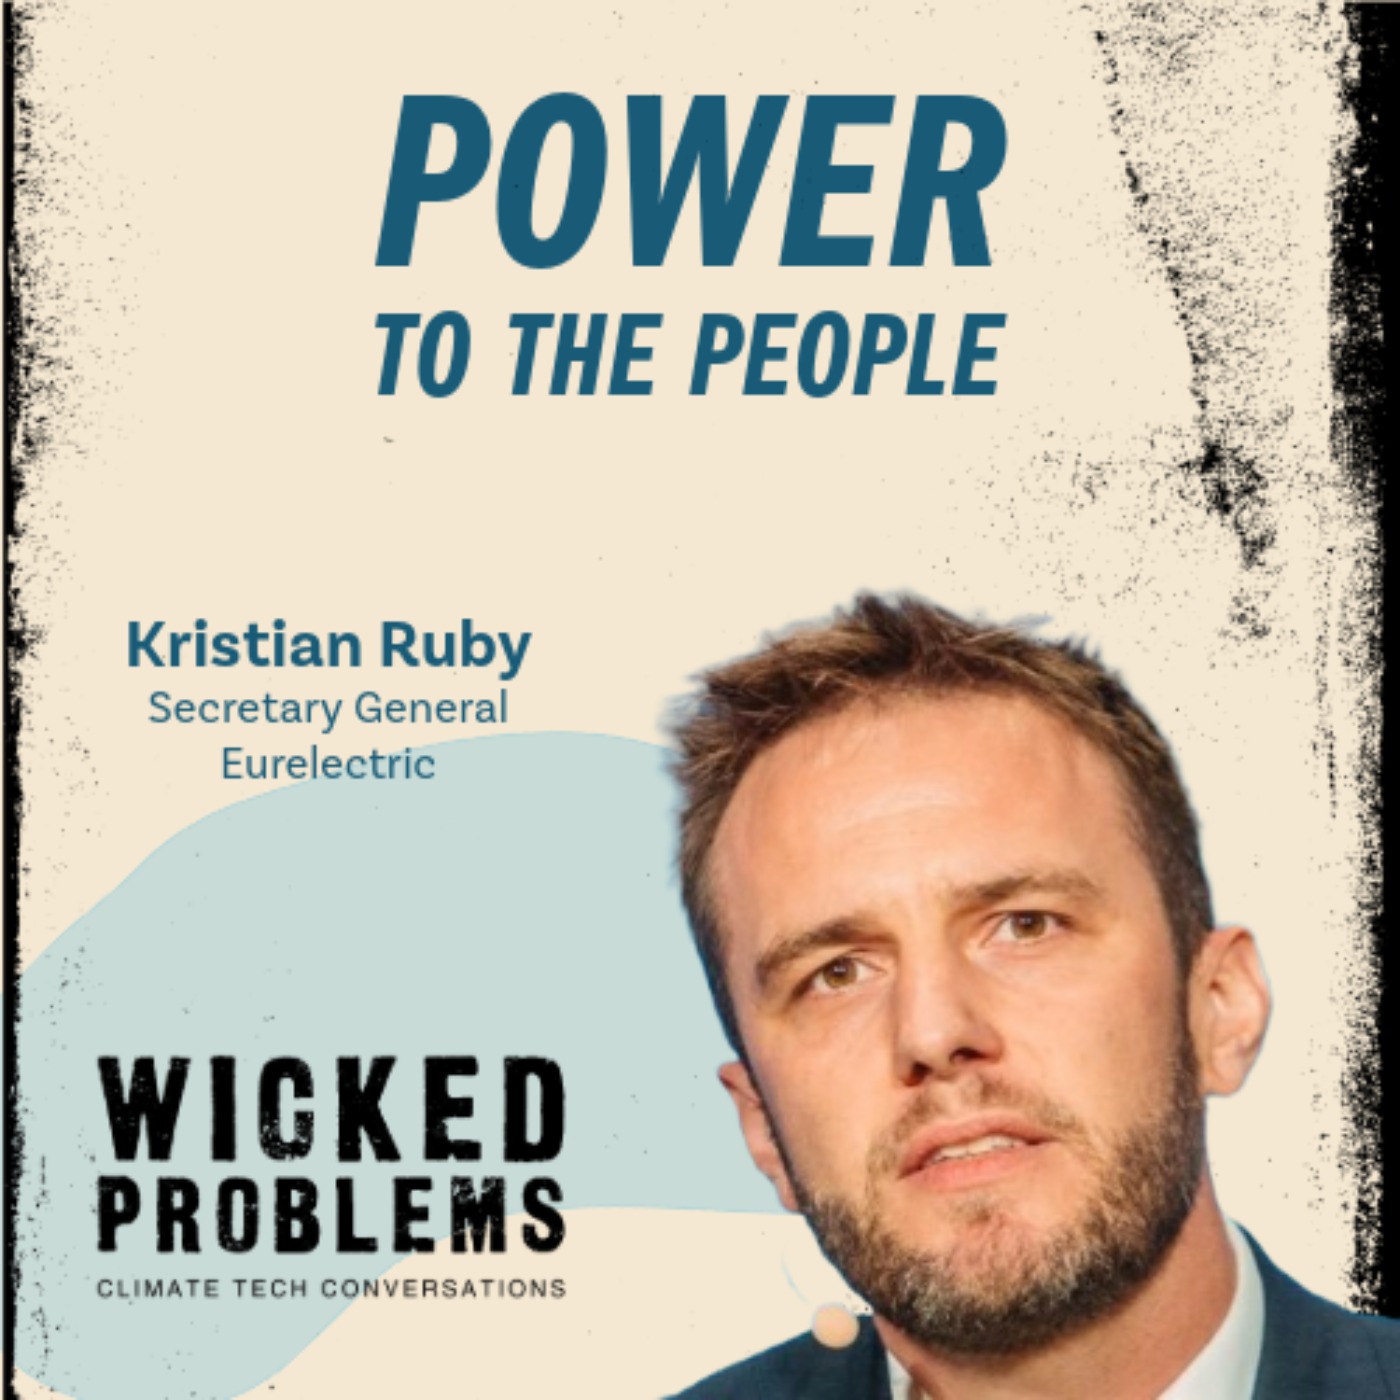 Kristian Ruby, Eurelectric: Power to the People